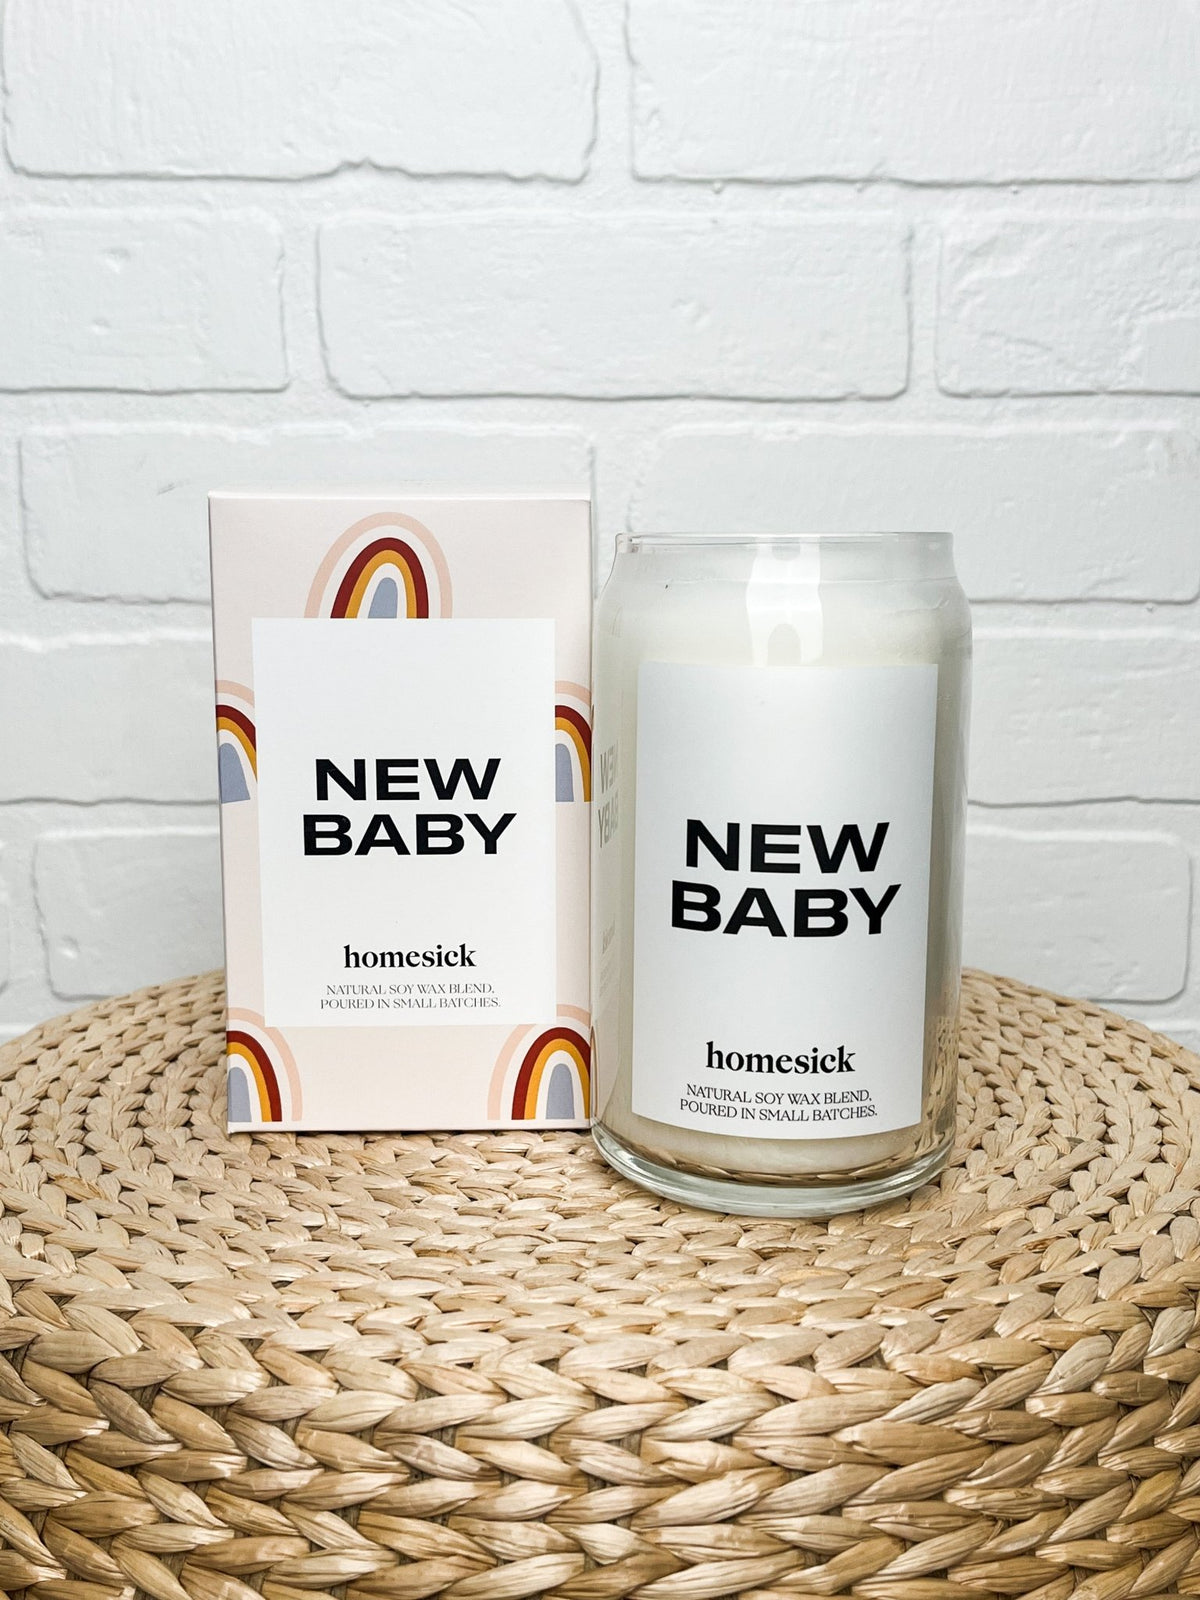 Homesick New Baby candle - Trendy Candles at Lush Fashion Lounge Boutique in Oklahoma City